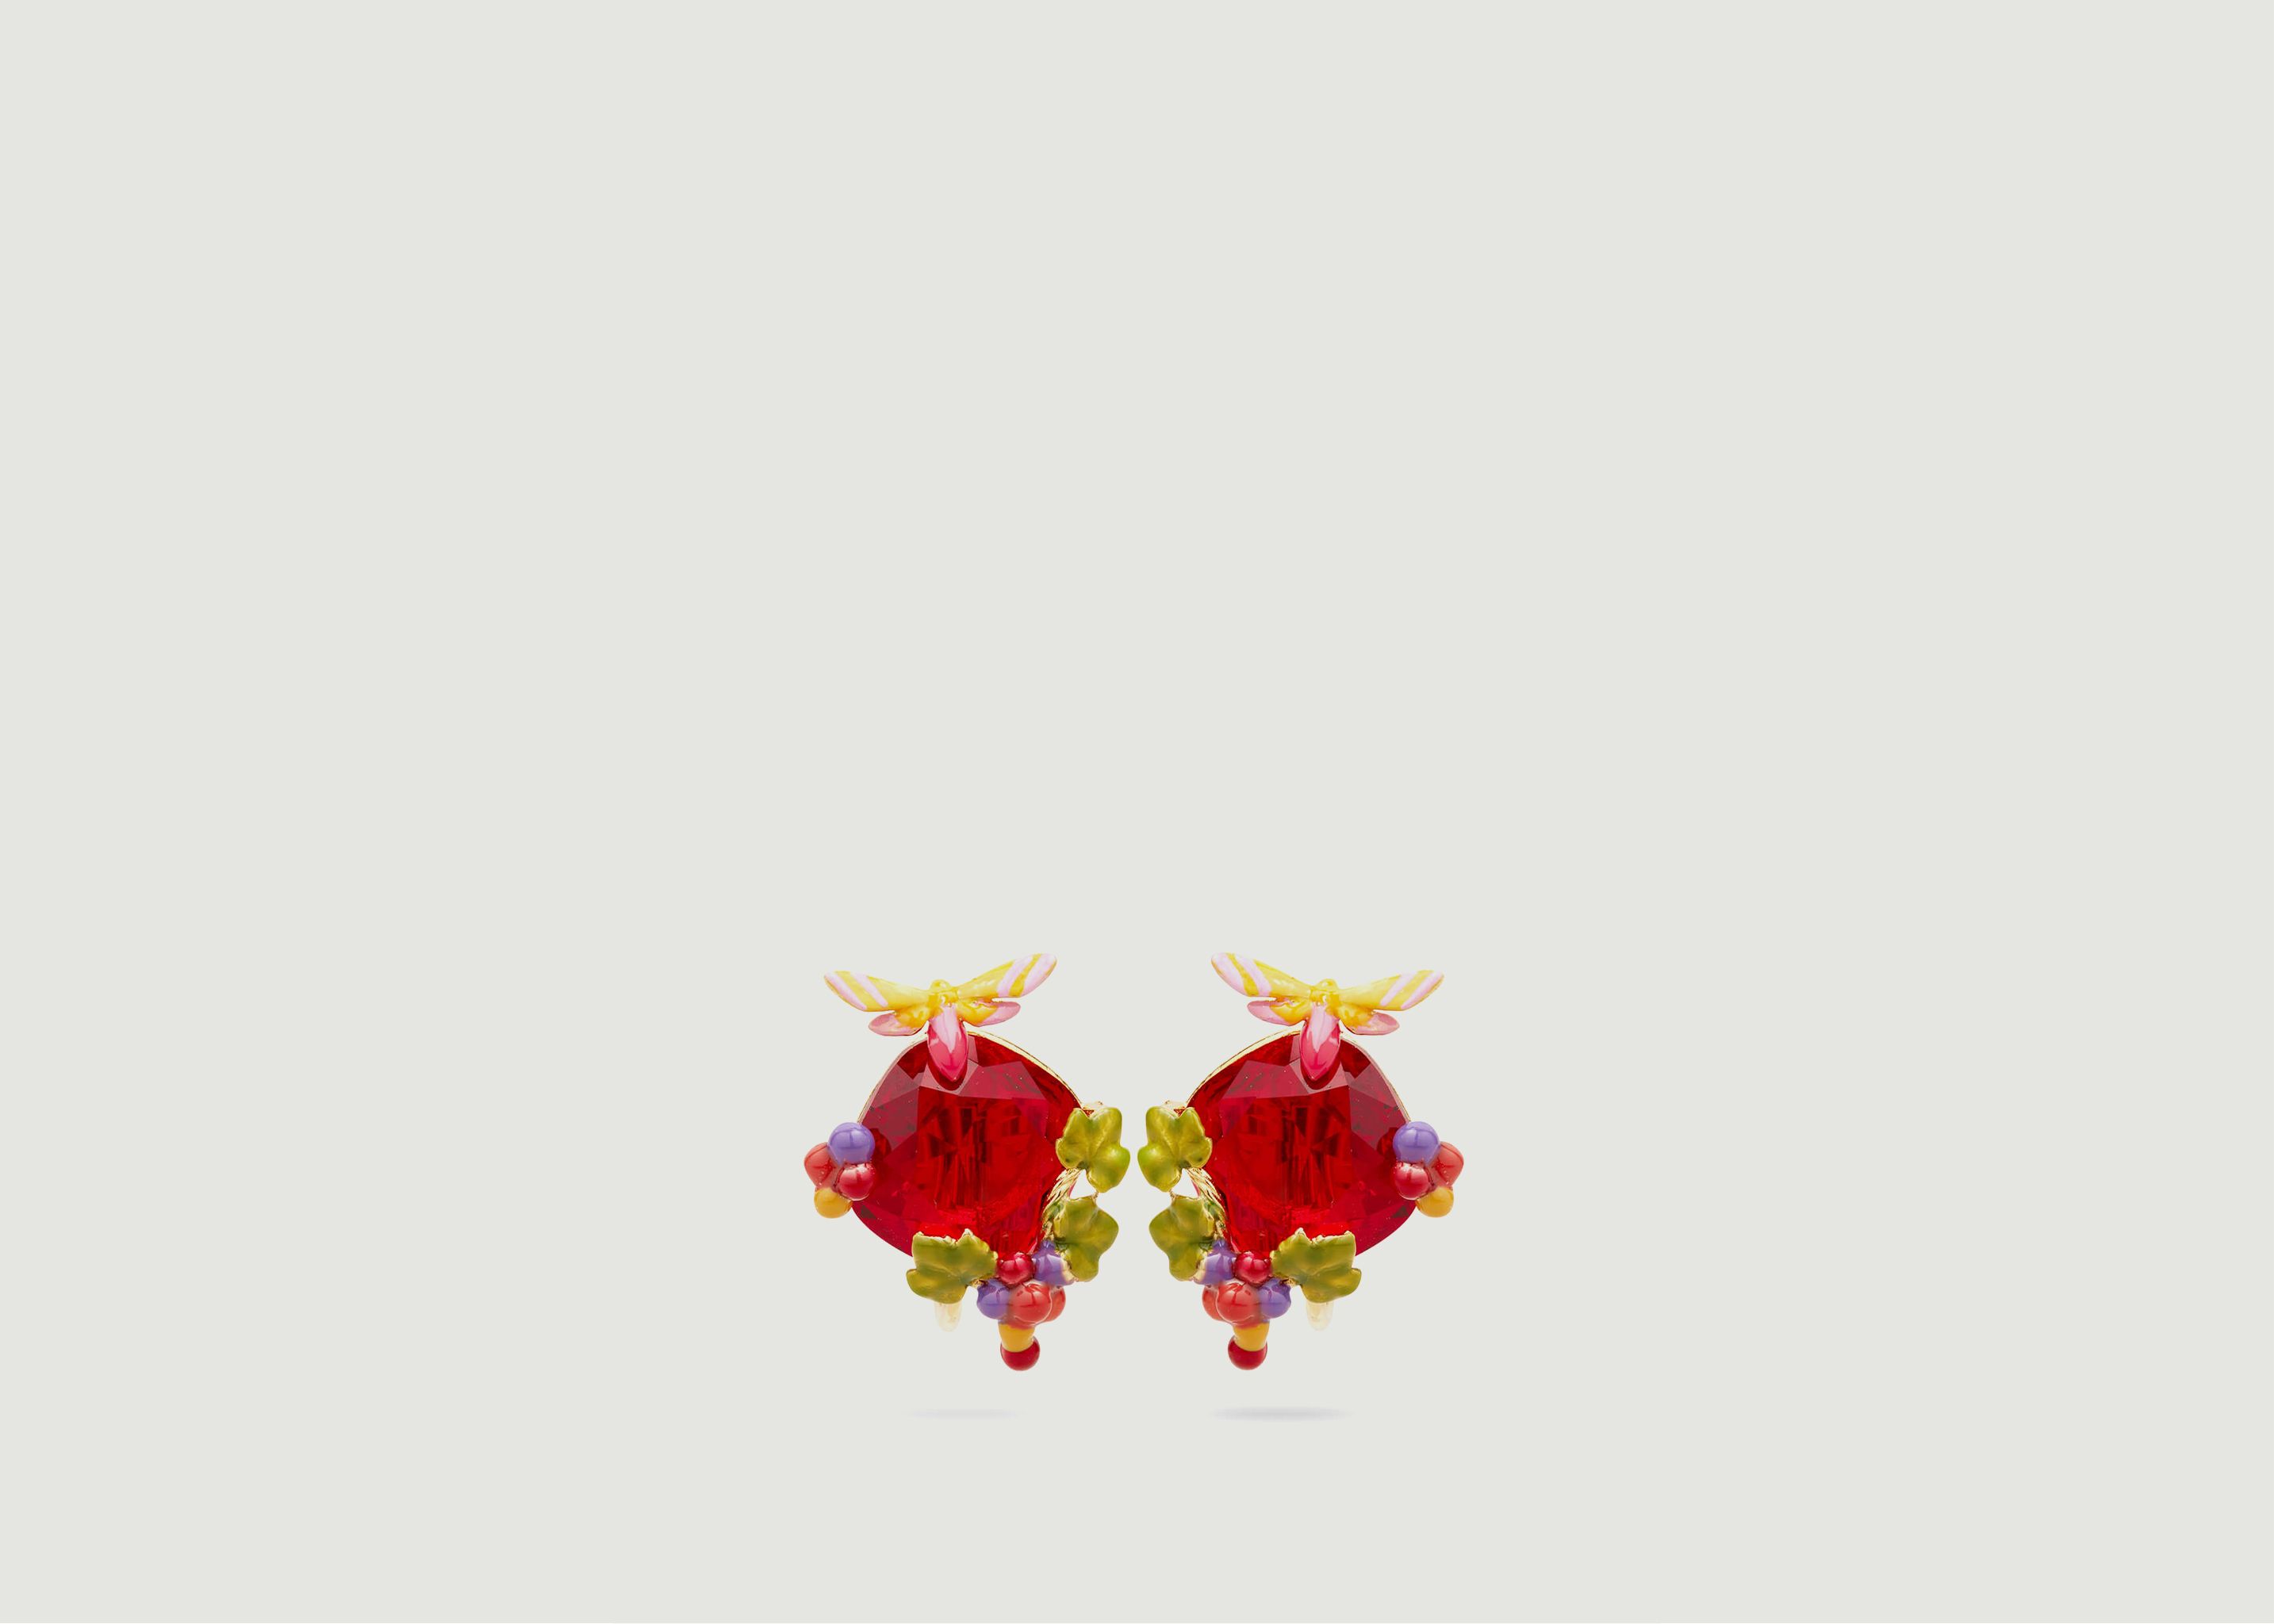 Butterfly and grapes earrings - Les Néréides